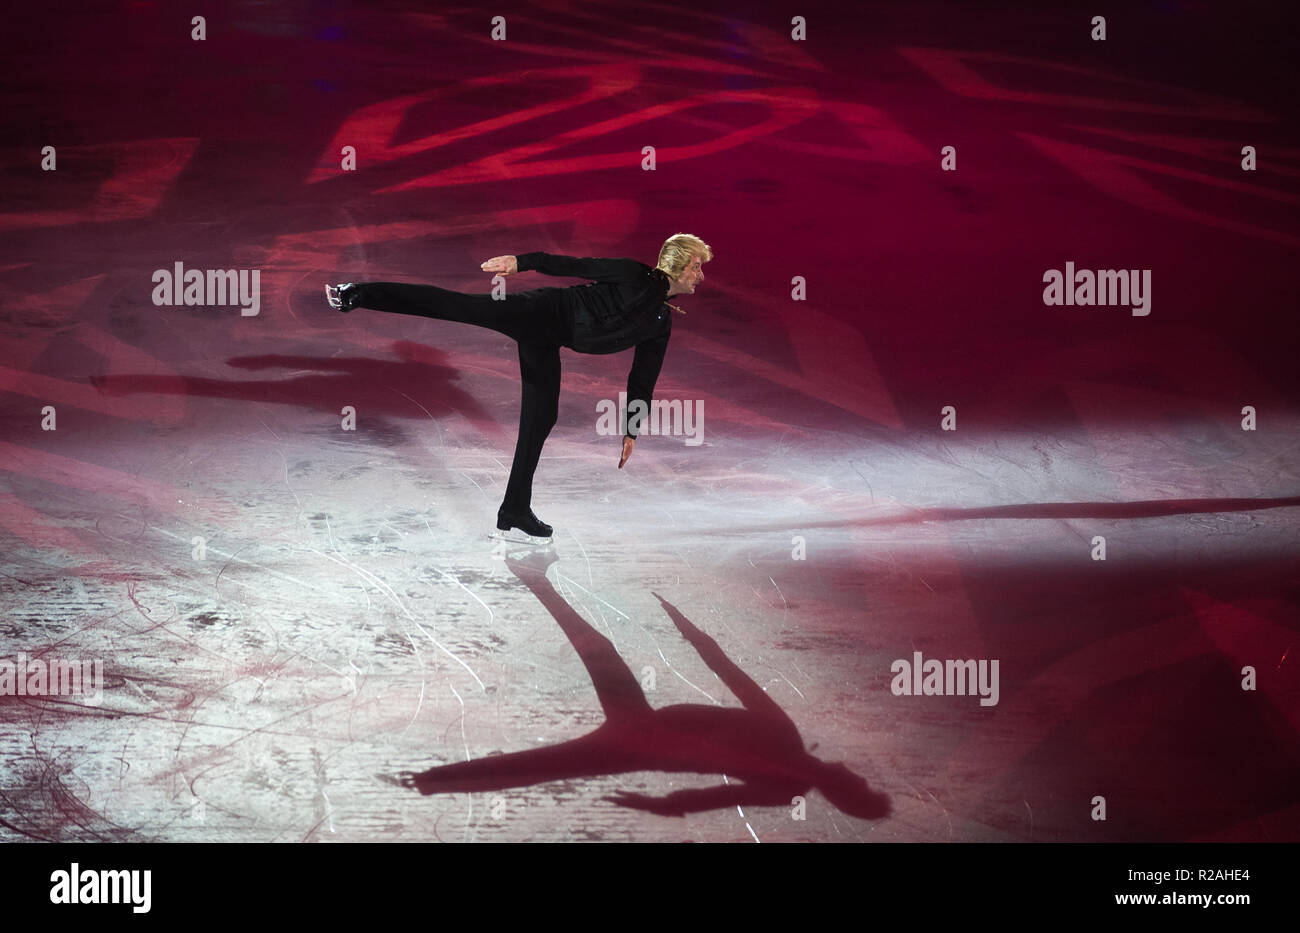 Malaga, MALAGA, Spain. 17th Nov, 2018. Russian figure skater Evgeni Plushenko seen performing on ice during the show.Revolution on Ice Tour show is a spectacle of figure skating on ice with an international cast of world champion skaters, headed by the Spanish skater Javier FernÃ¡ndez. The show also features musical and acrobatics performances. Credit: Jesus Merida/SOPA Images/ZUMA Wire/Alamy Live News Stock Photo